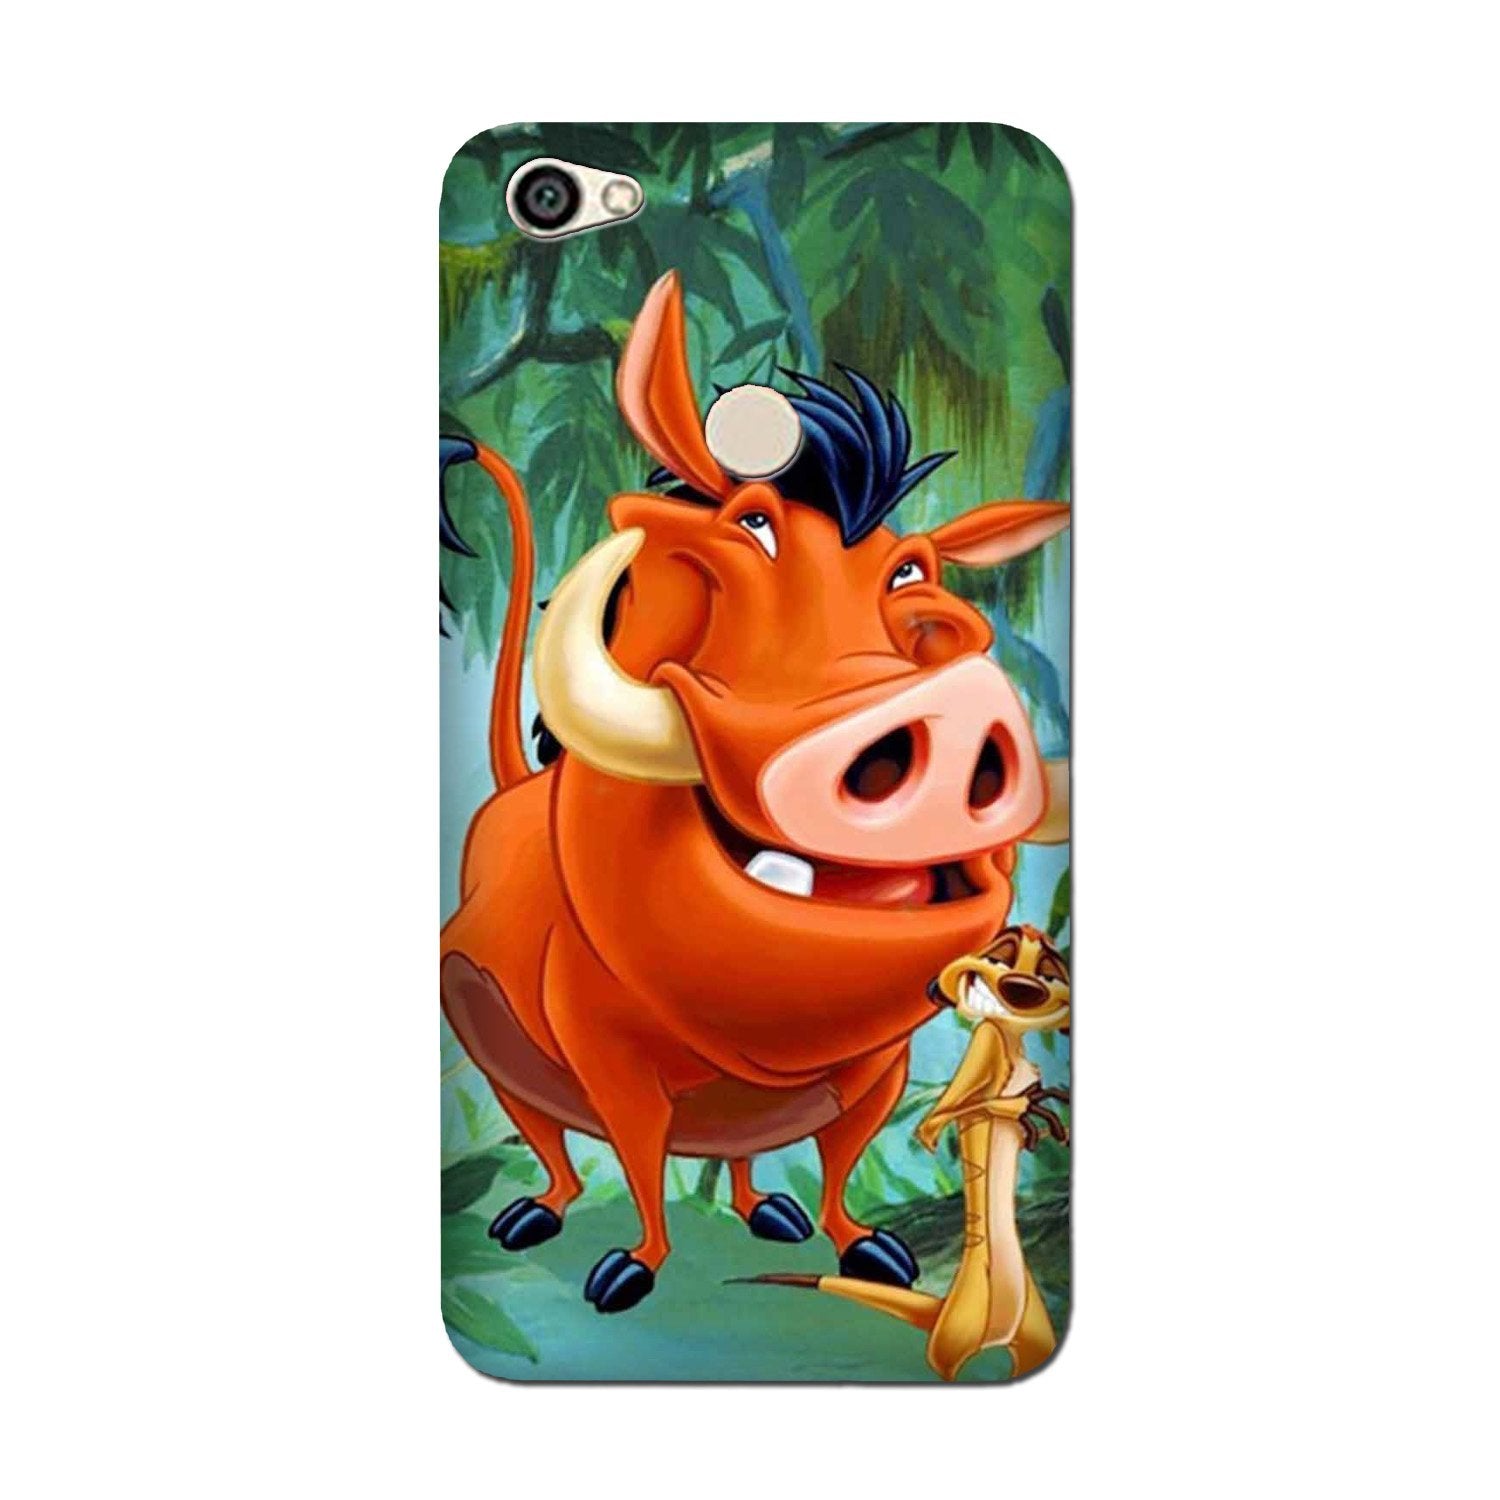 Timon and Pumbaa Mobile Back Case for Redmi Y1 Lite (Design - 305)